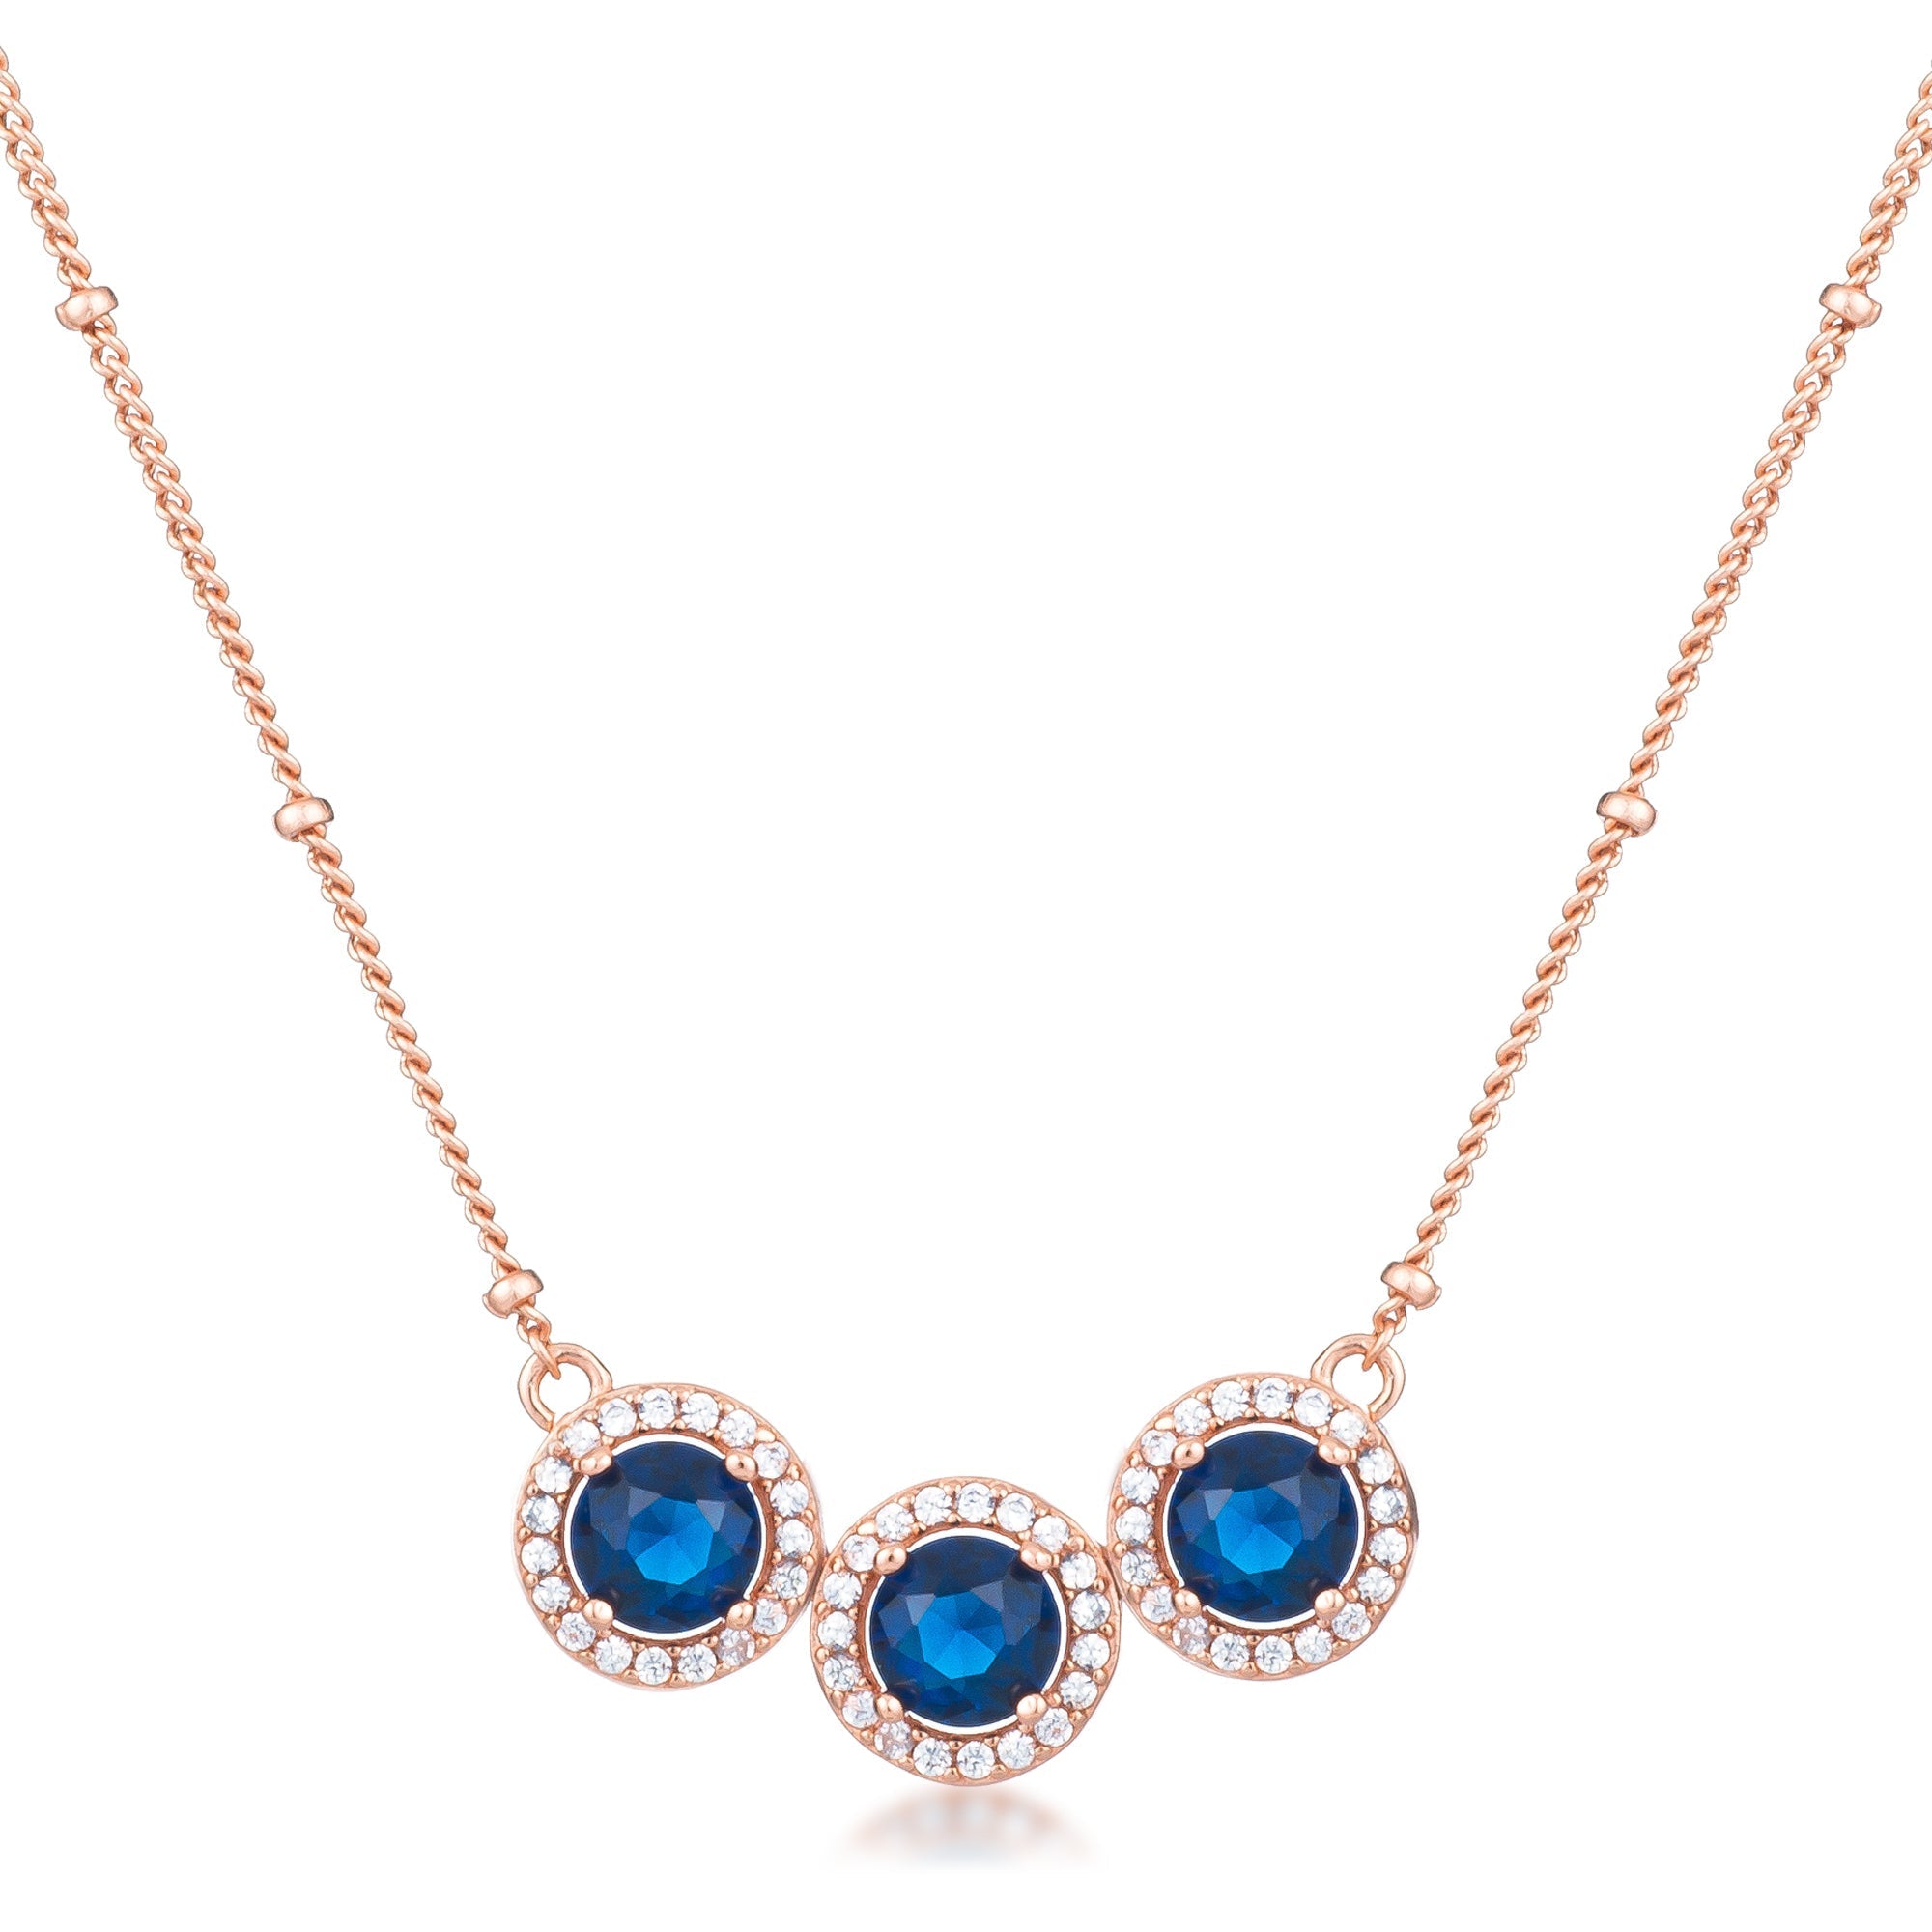 3.1Ct Rose Gold Plated Sapphire Blue Tri-Halo CZ Pendant - LinkagejewelrydesignLinkagejewelrydesign